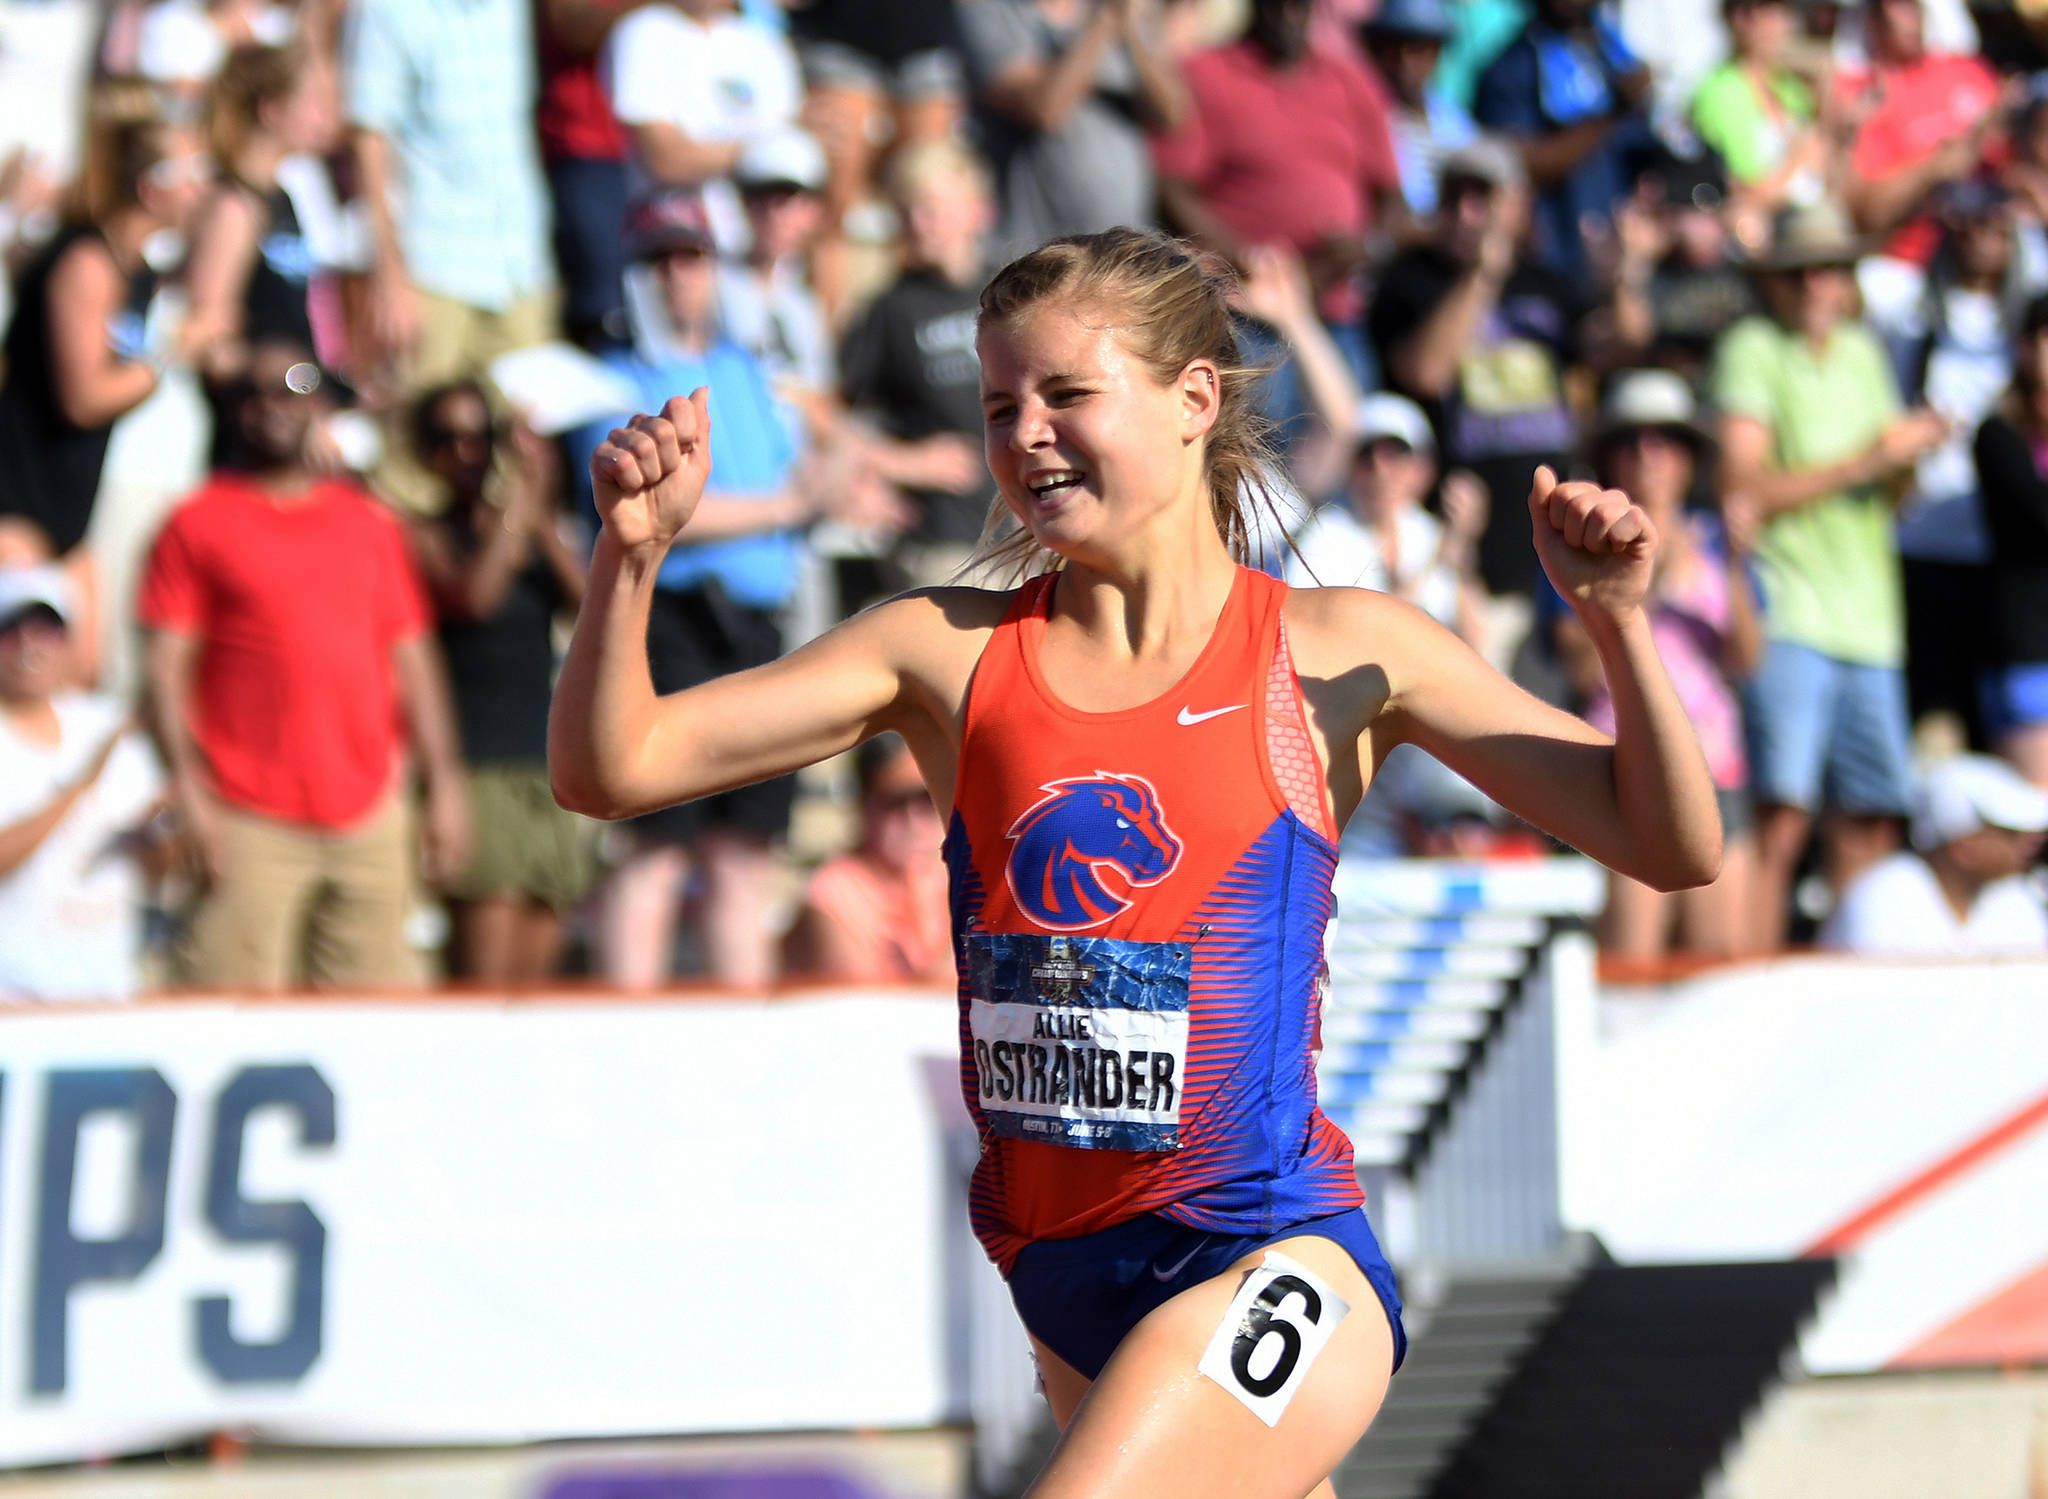 Boise State redshirt junior and Kenai Central graduate Allie Ostrander throws up her arms after winning the women’s 3,000-kilometer steeplechase title Saturday, June 8, 2019, at the Div. I track and field championships in Austin, Texas. (Photo provided by Boise State Athletics)